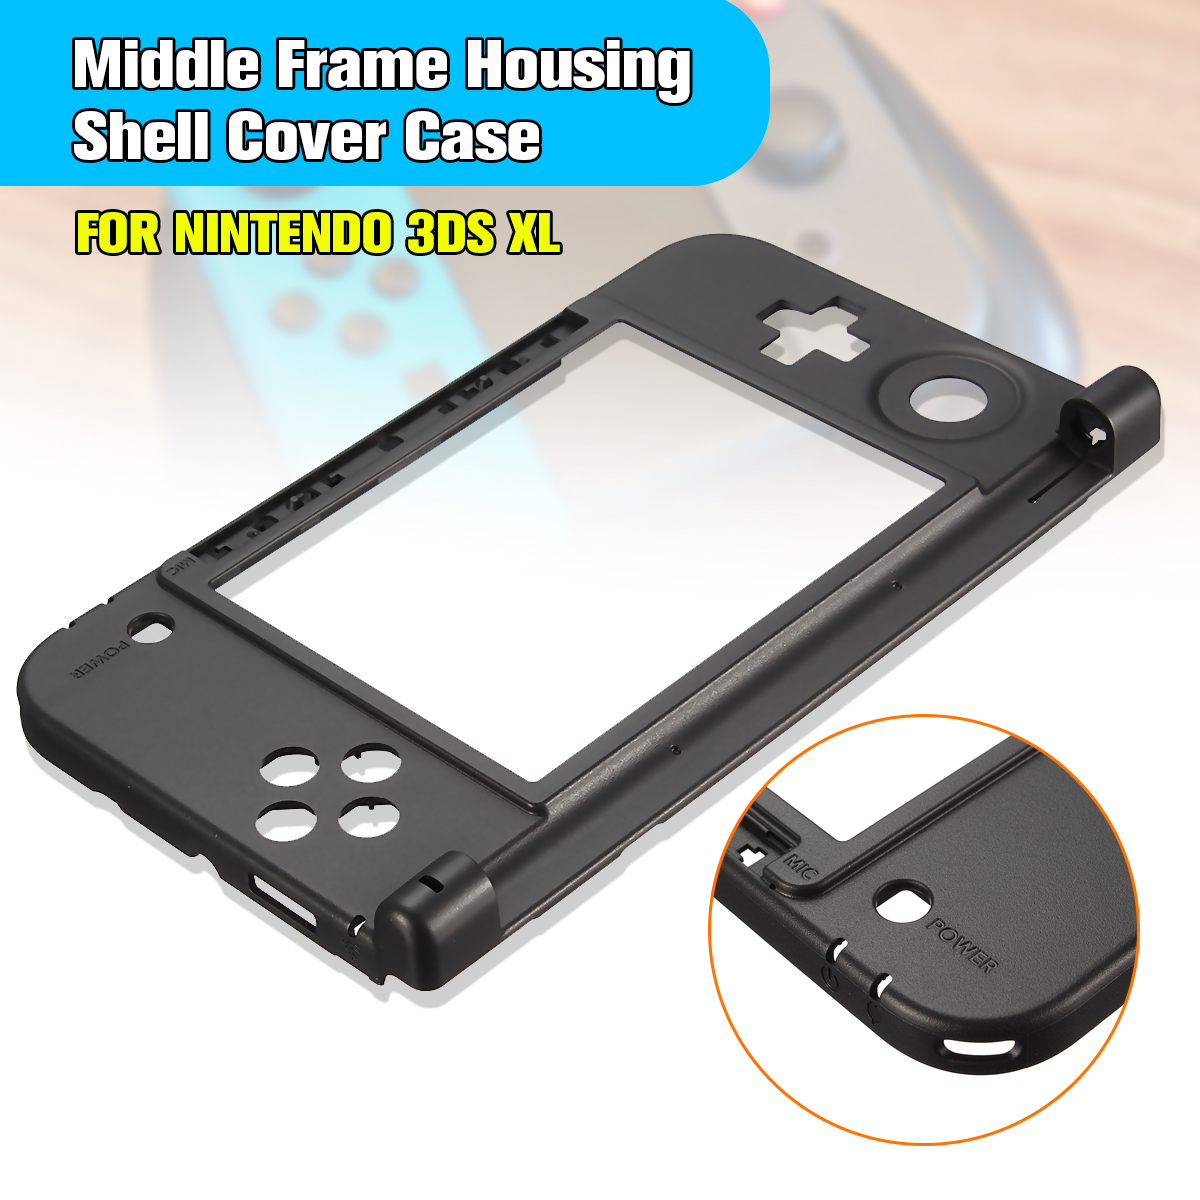 Replacement Bottom Middle Frame Housing Shell Cover Case for Nintendo 3DS XL 3DS LL Game Console 7